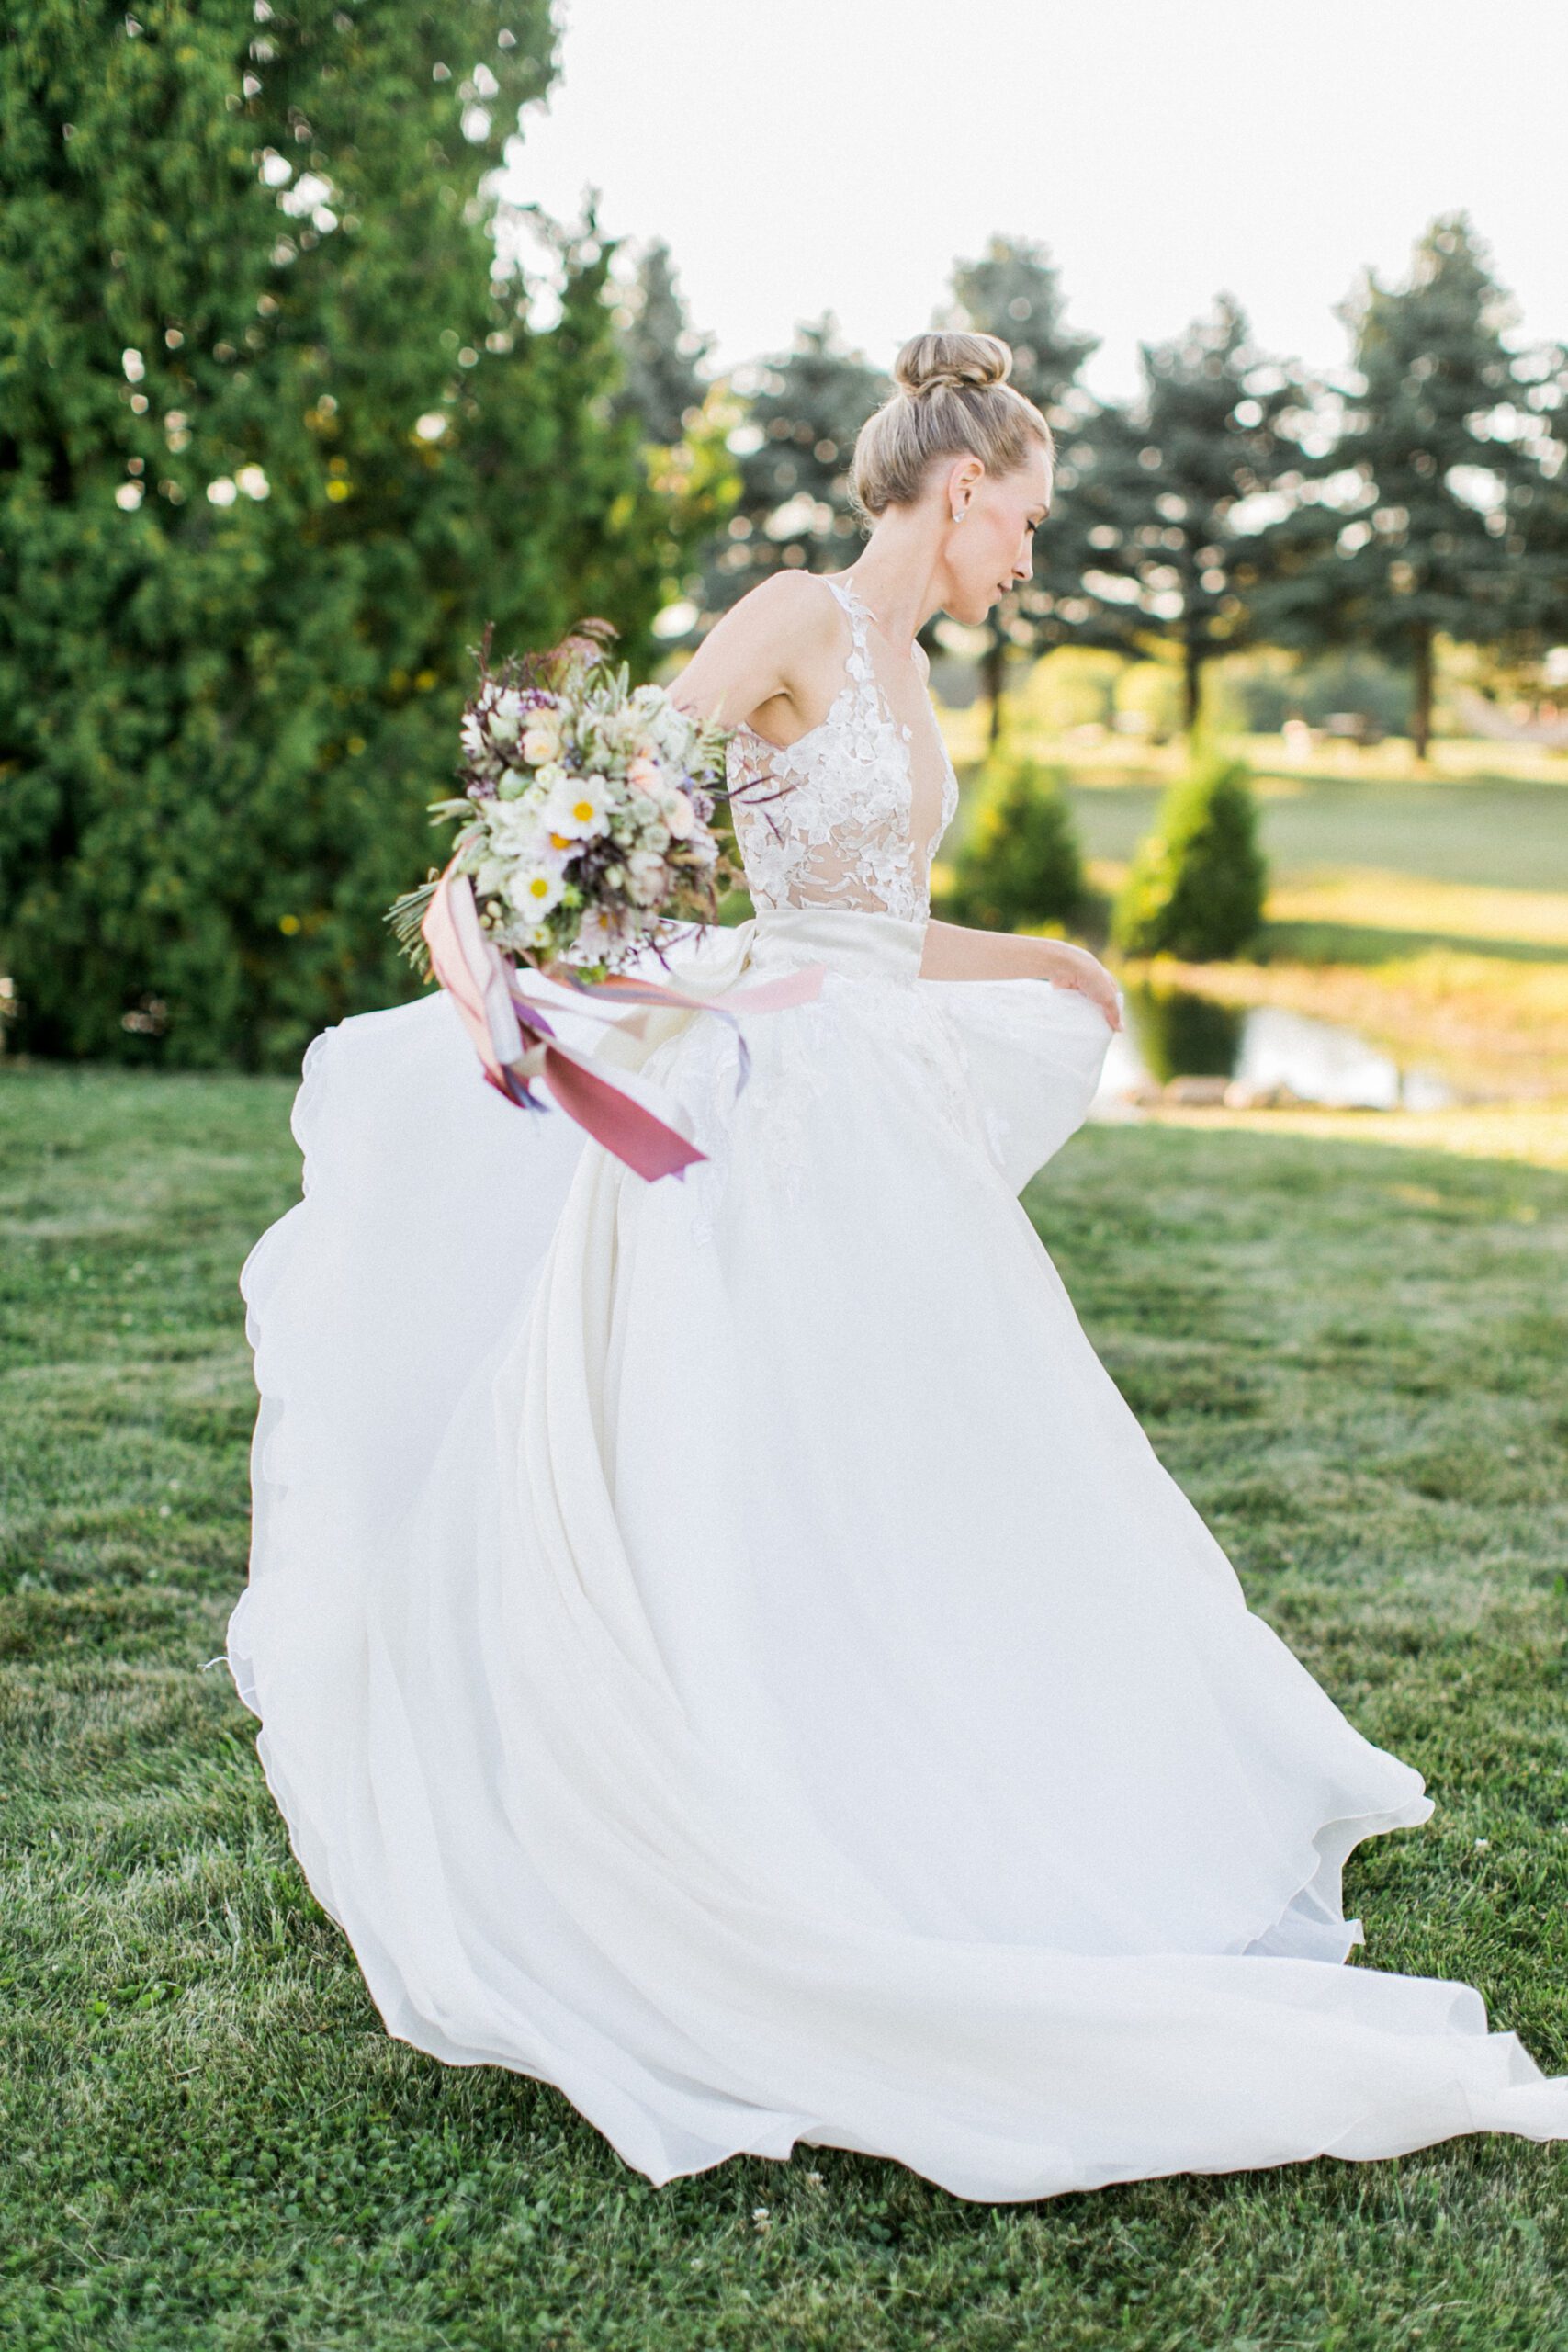 A bride spins for wedding photography near traverse city, michigan